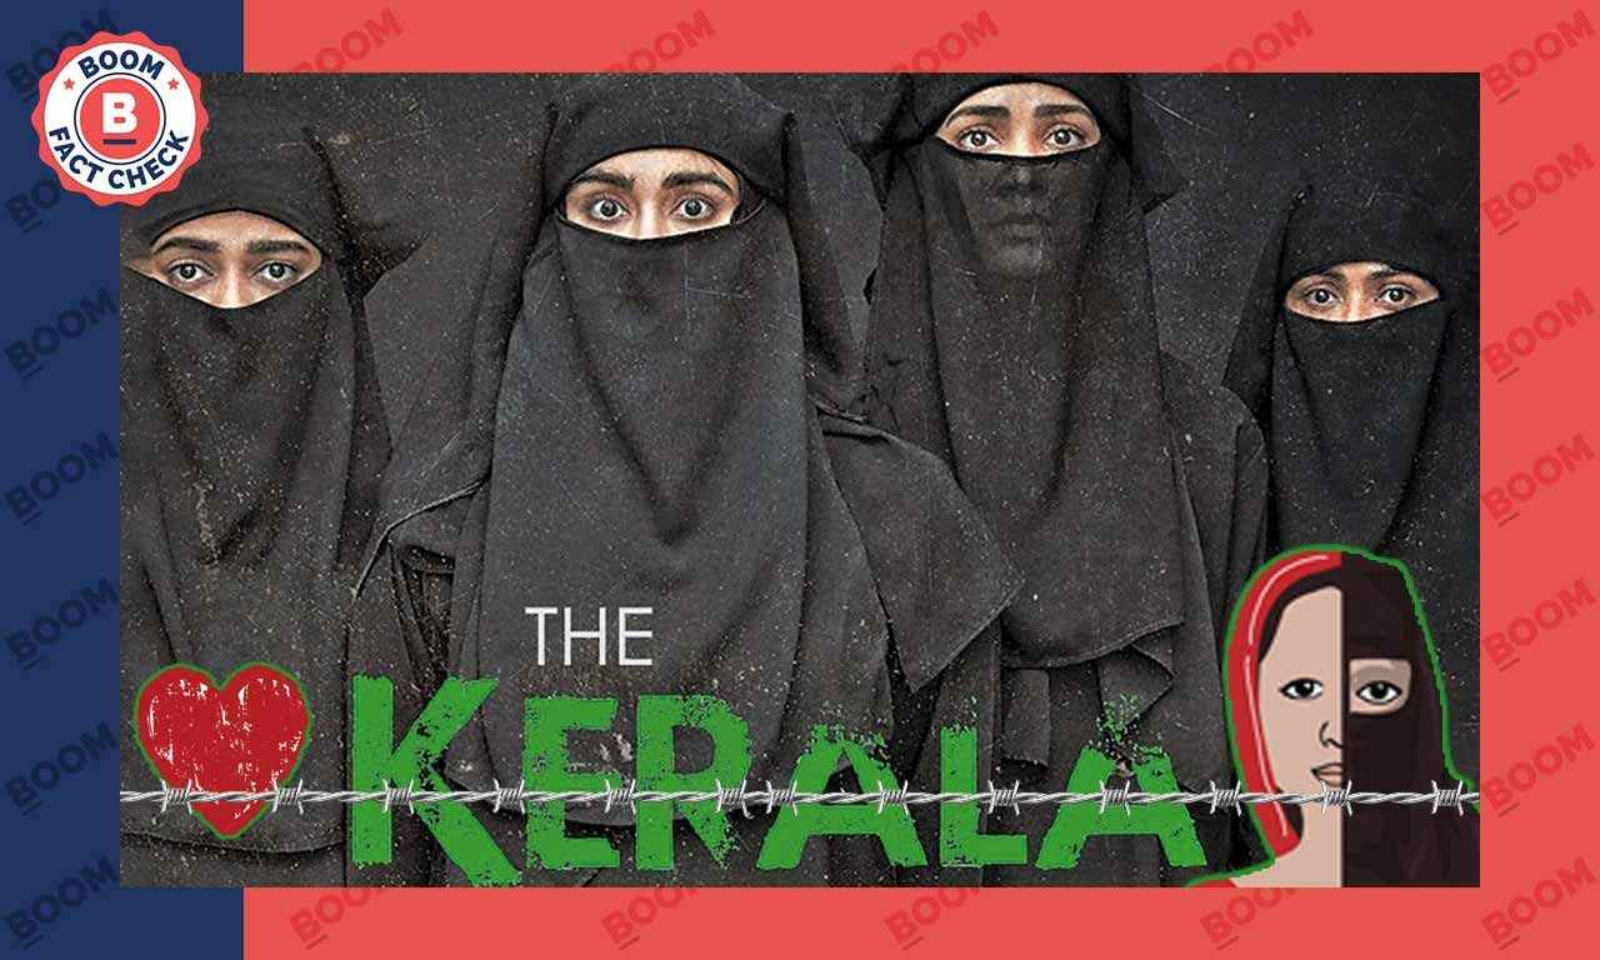 32K Women Missing Claim Made By The Kerala Story Does Not Add Up BOOM picture